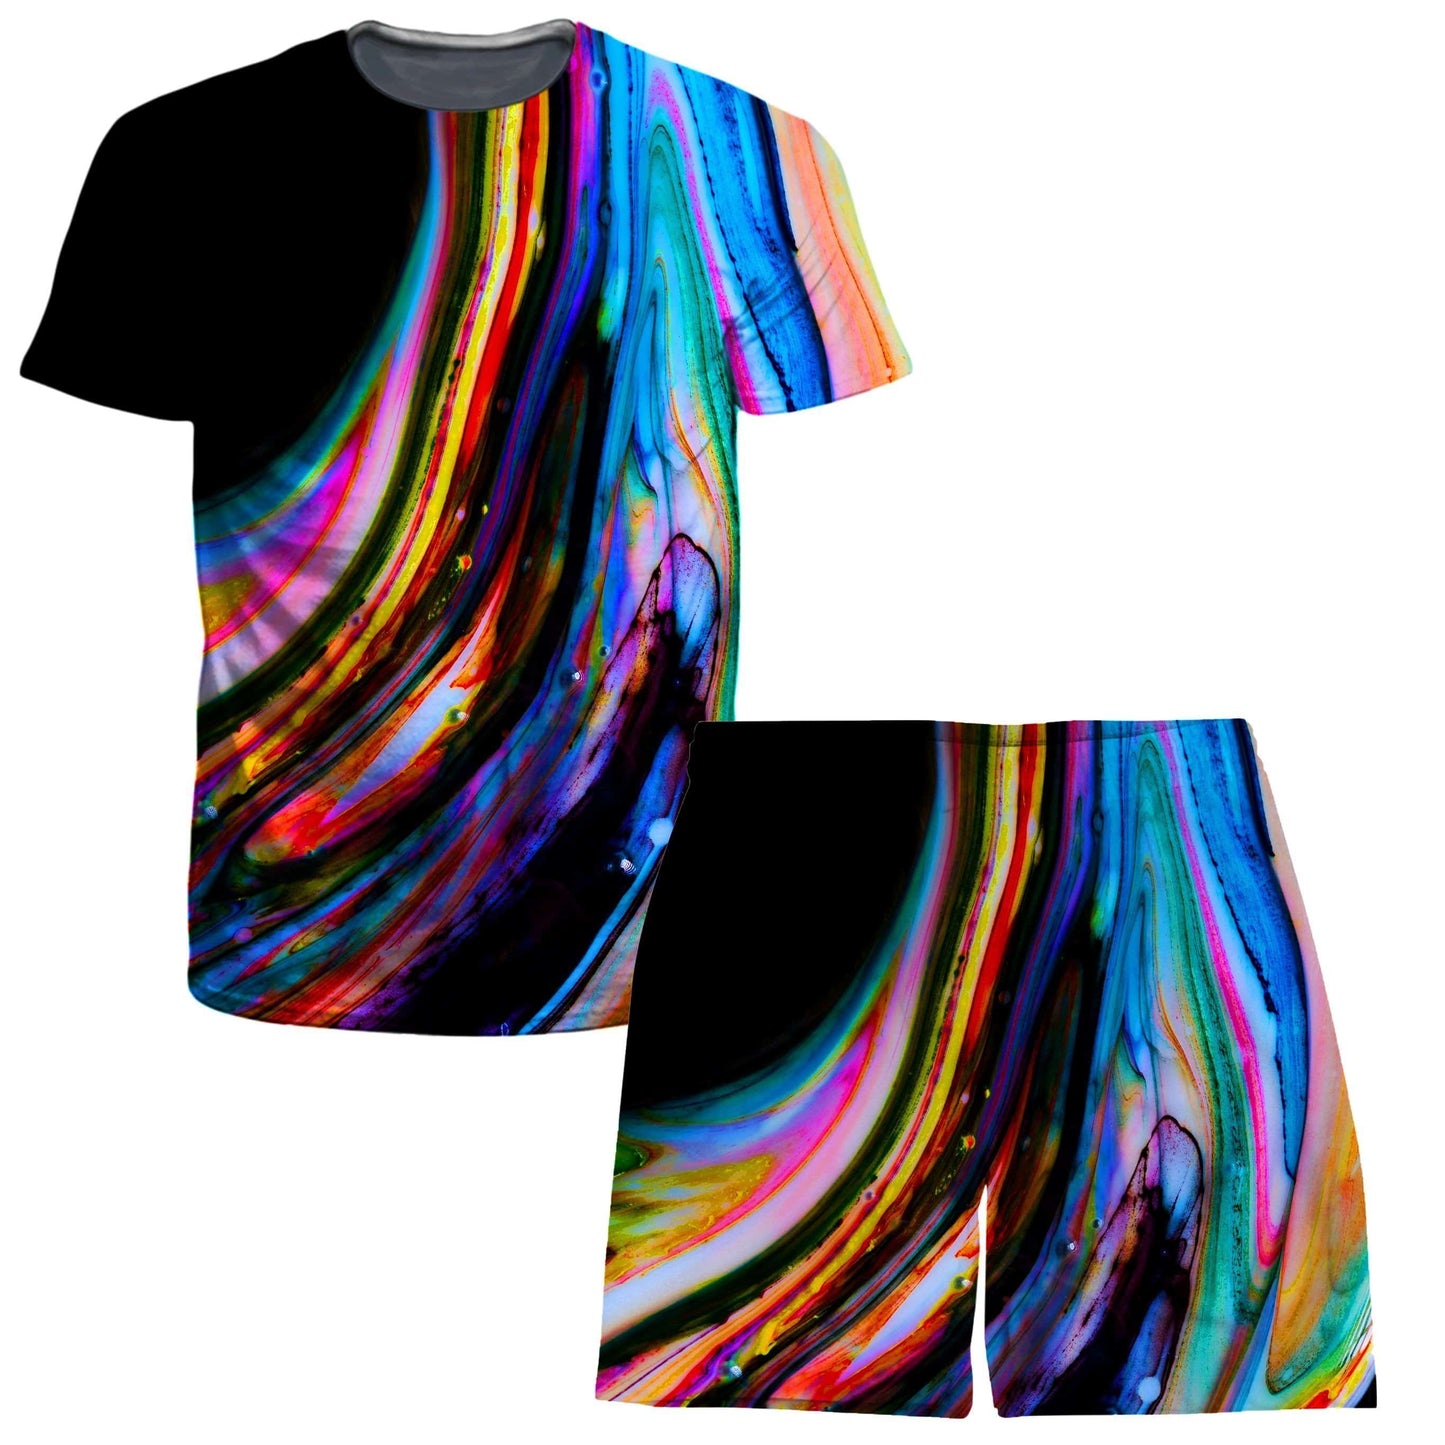 Interstellar One T-Shirt and Shorts Combo, Noctum X Truth, | iEDM